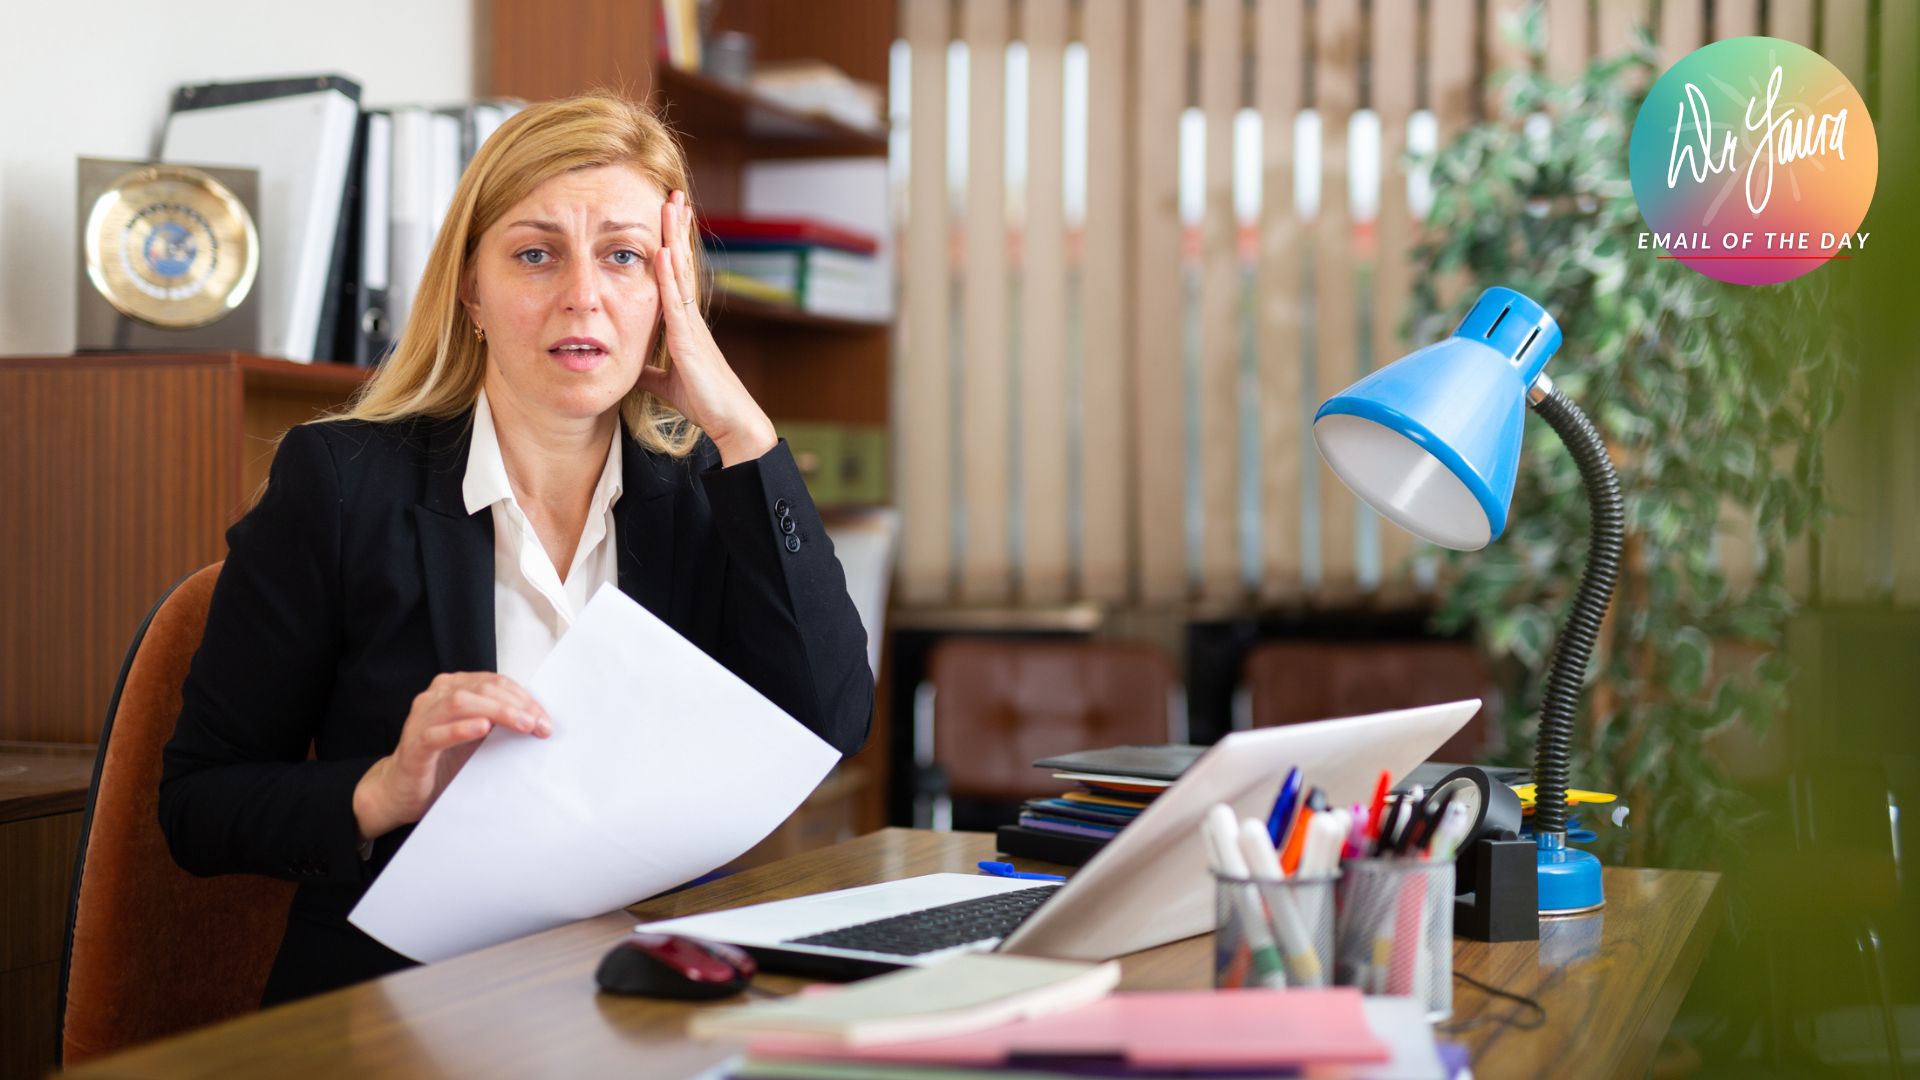 Woman looking stressed places hand on head while holding paper and sitting in front of work desk